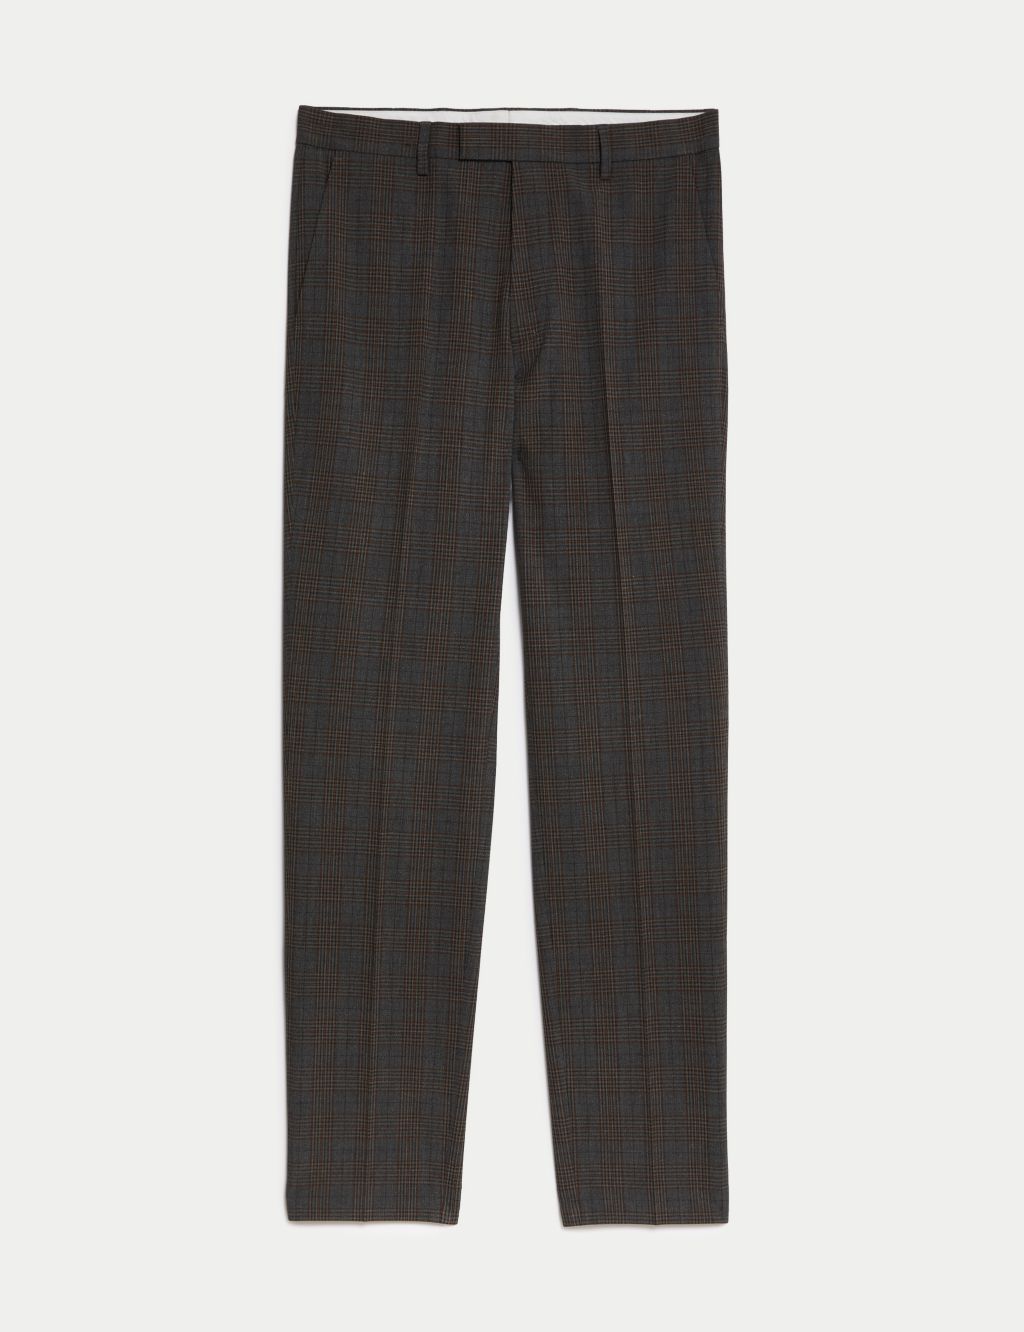 Textured Checked Stretch Trousers image 7